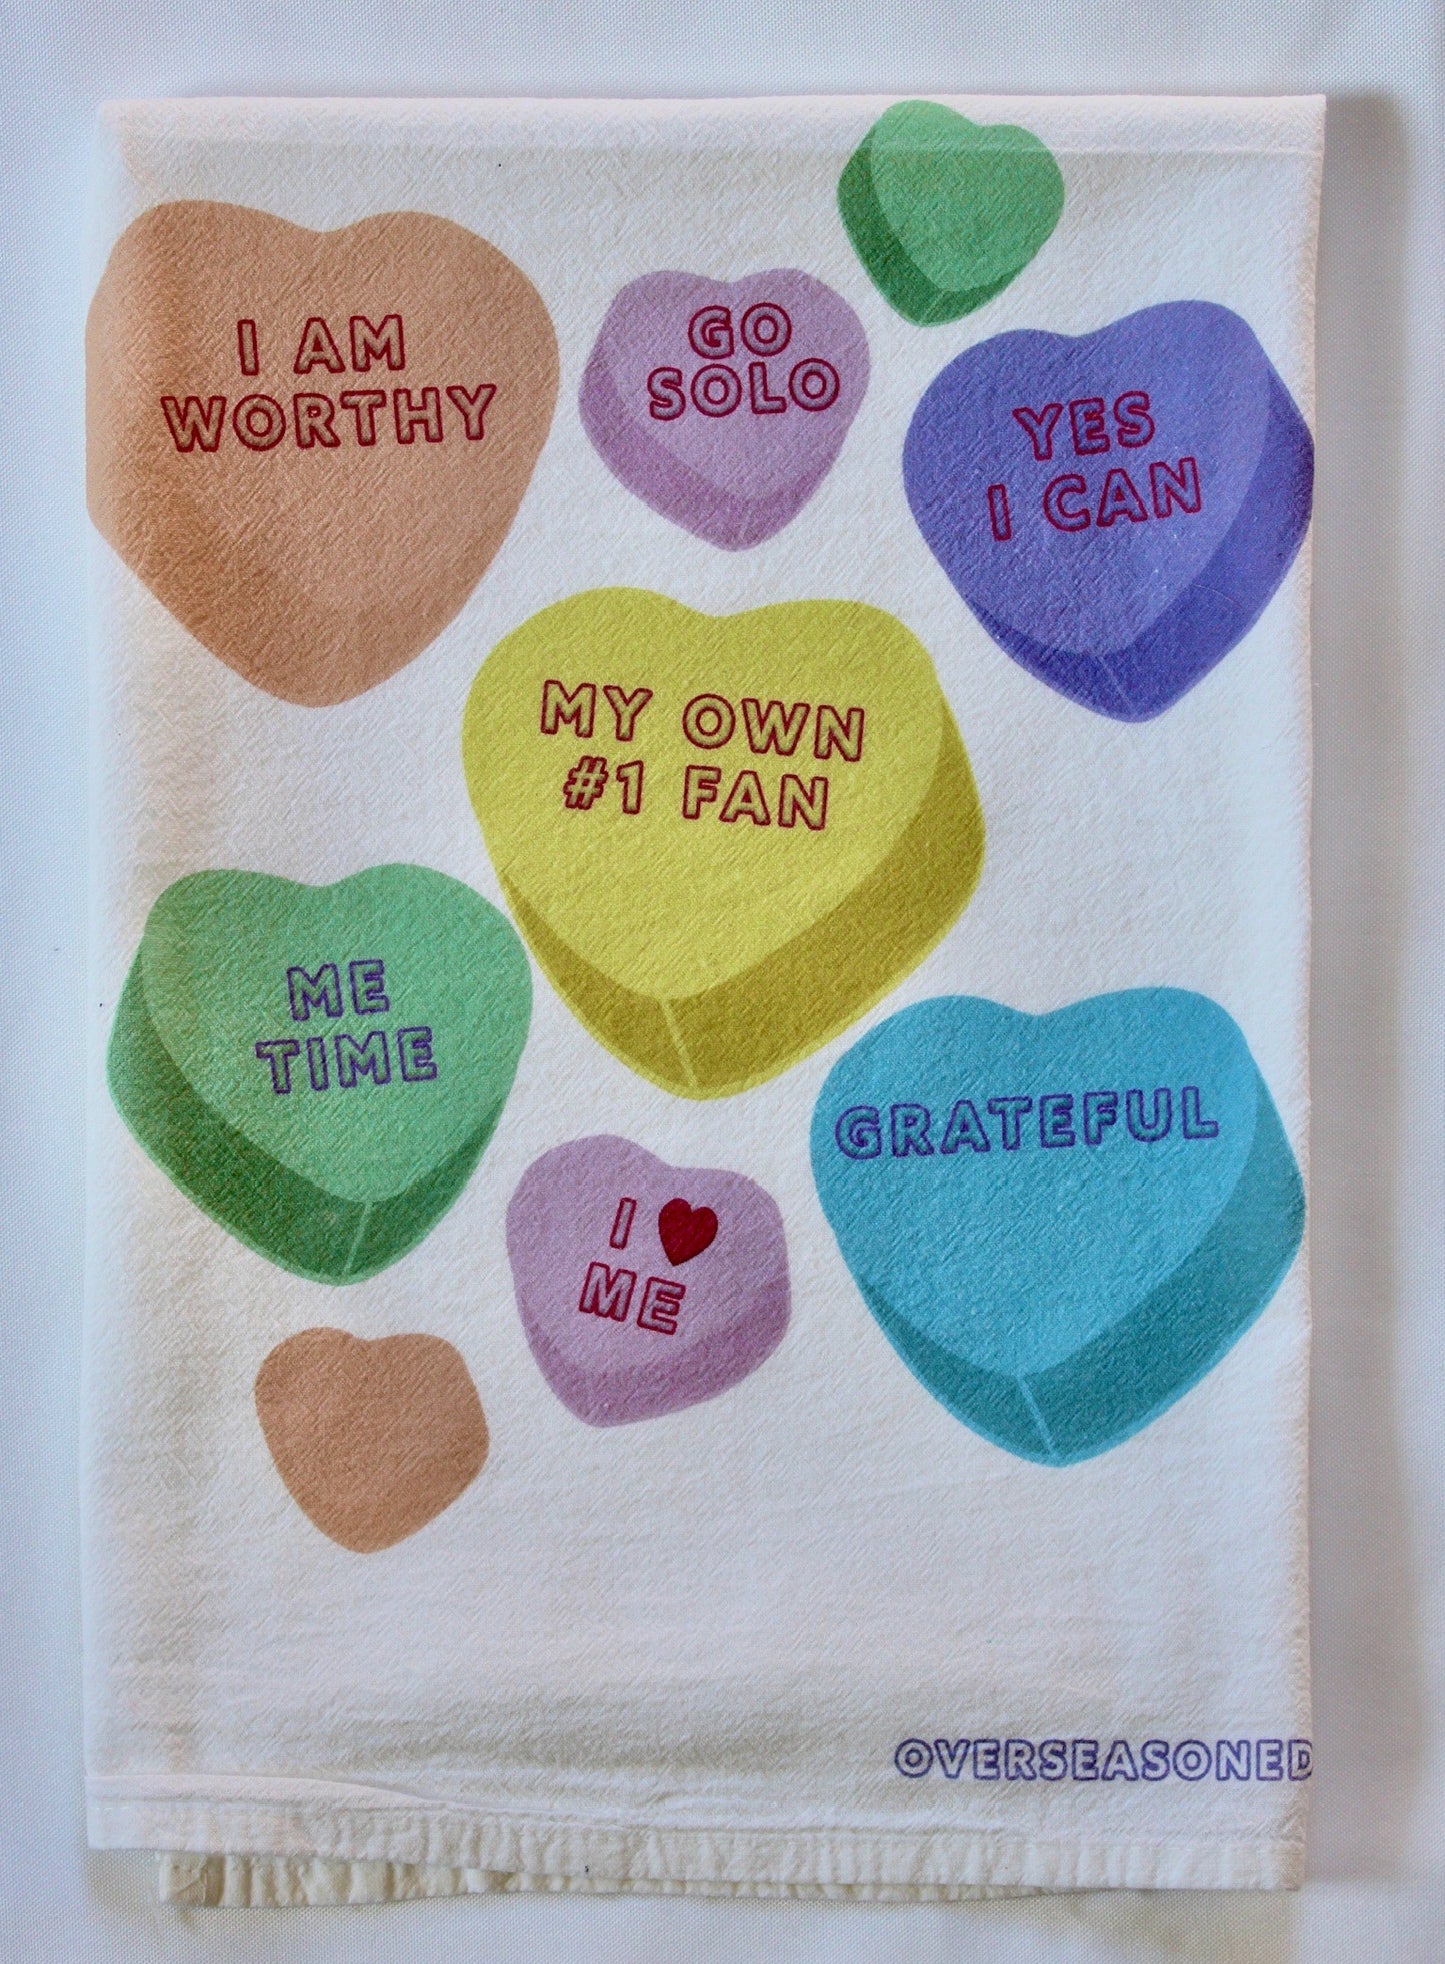 White tea towel with multicolored candy heart design with self-love phrases